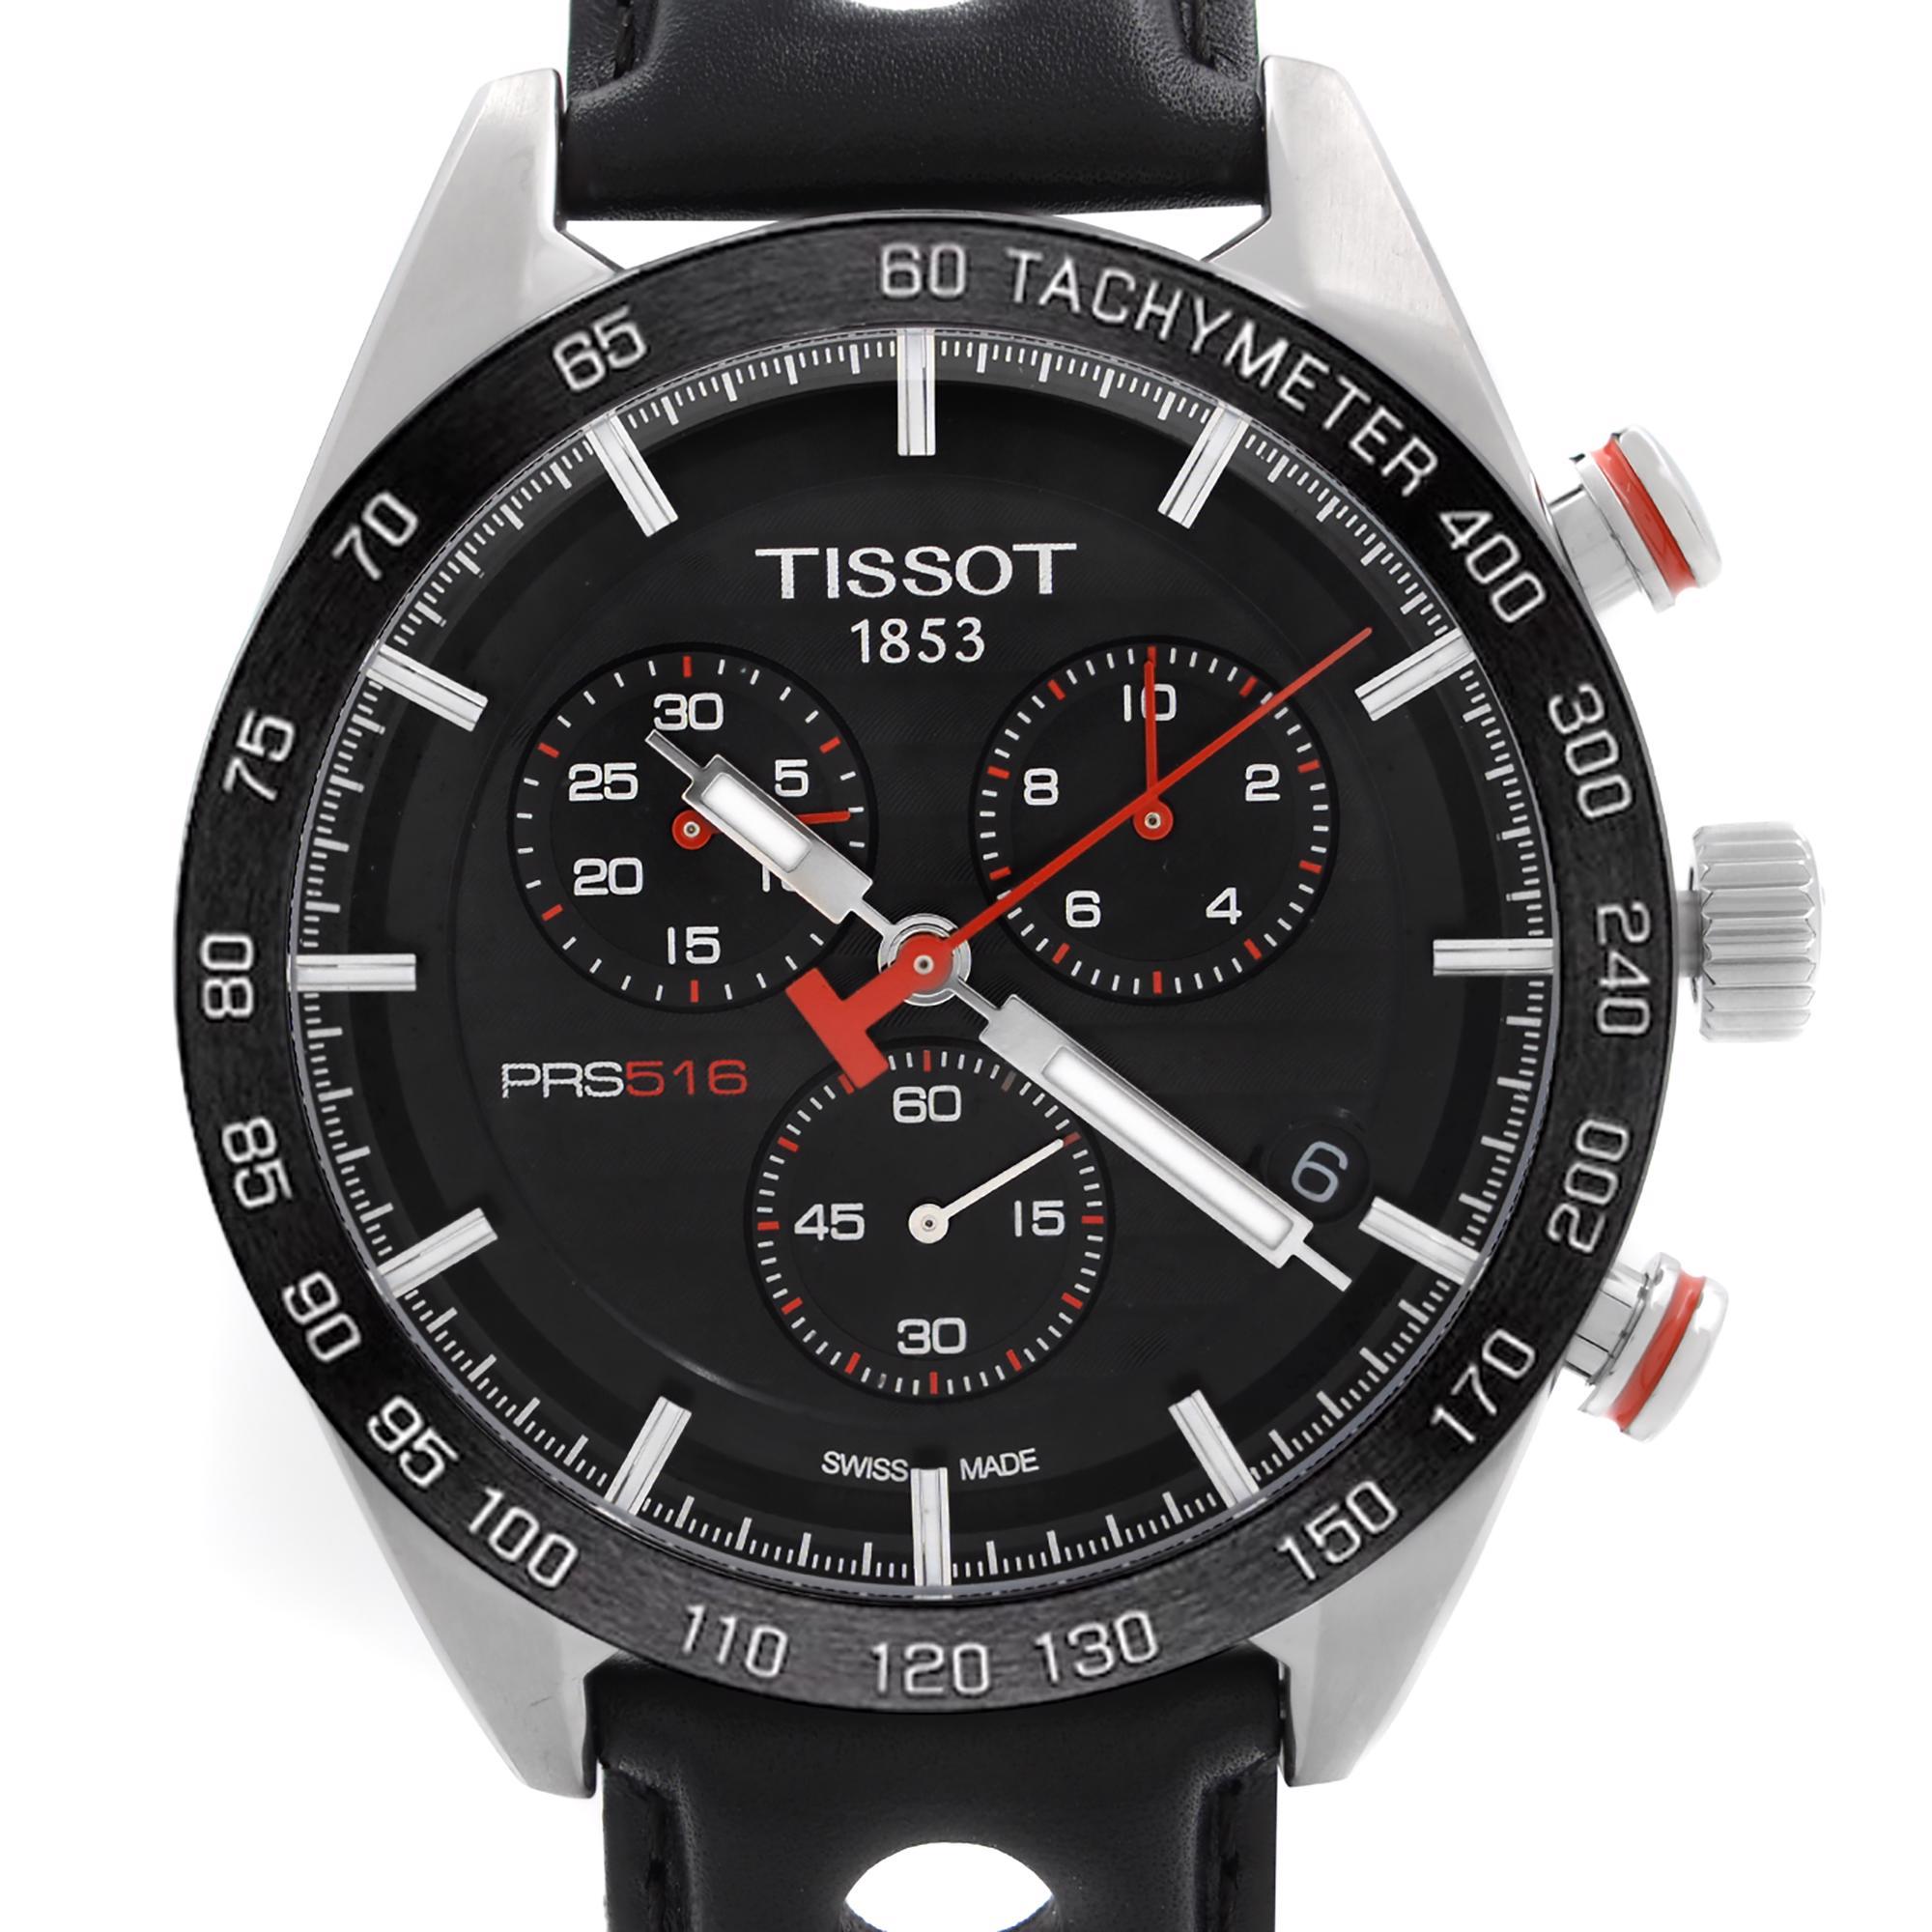 New with Defects Tissot PRS 516 Quartz Men's Watch T100.417.16.051.00. The Watch Has Blemishes on the Bezel, Case back, and Cracks on the Inner Side of the Band. This Beautiful Timepiece is Powered by Quartz (Battery) Movement And Features: Round